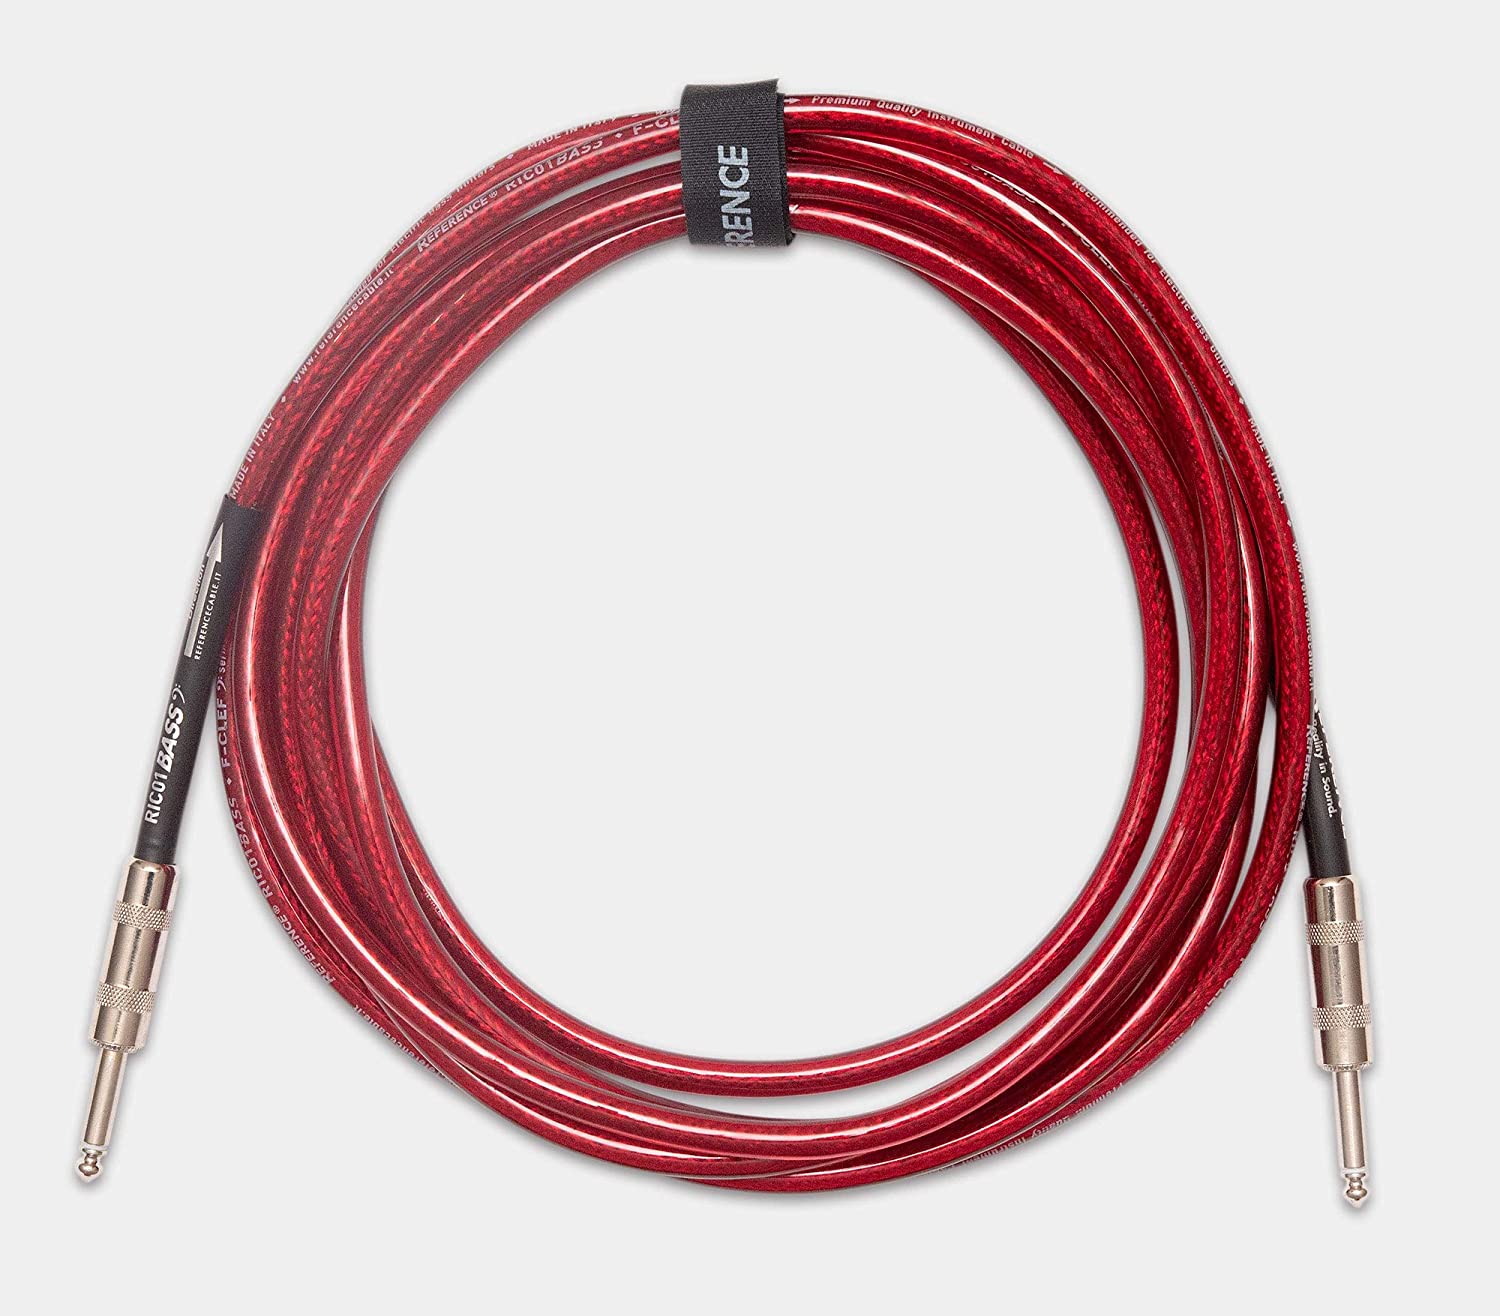 Reference Cables RIC01V ヴィンテージ用 ストレート-Ｌ字 5m - 吸気